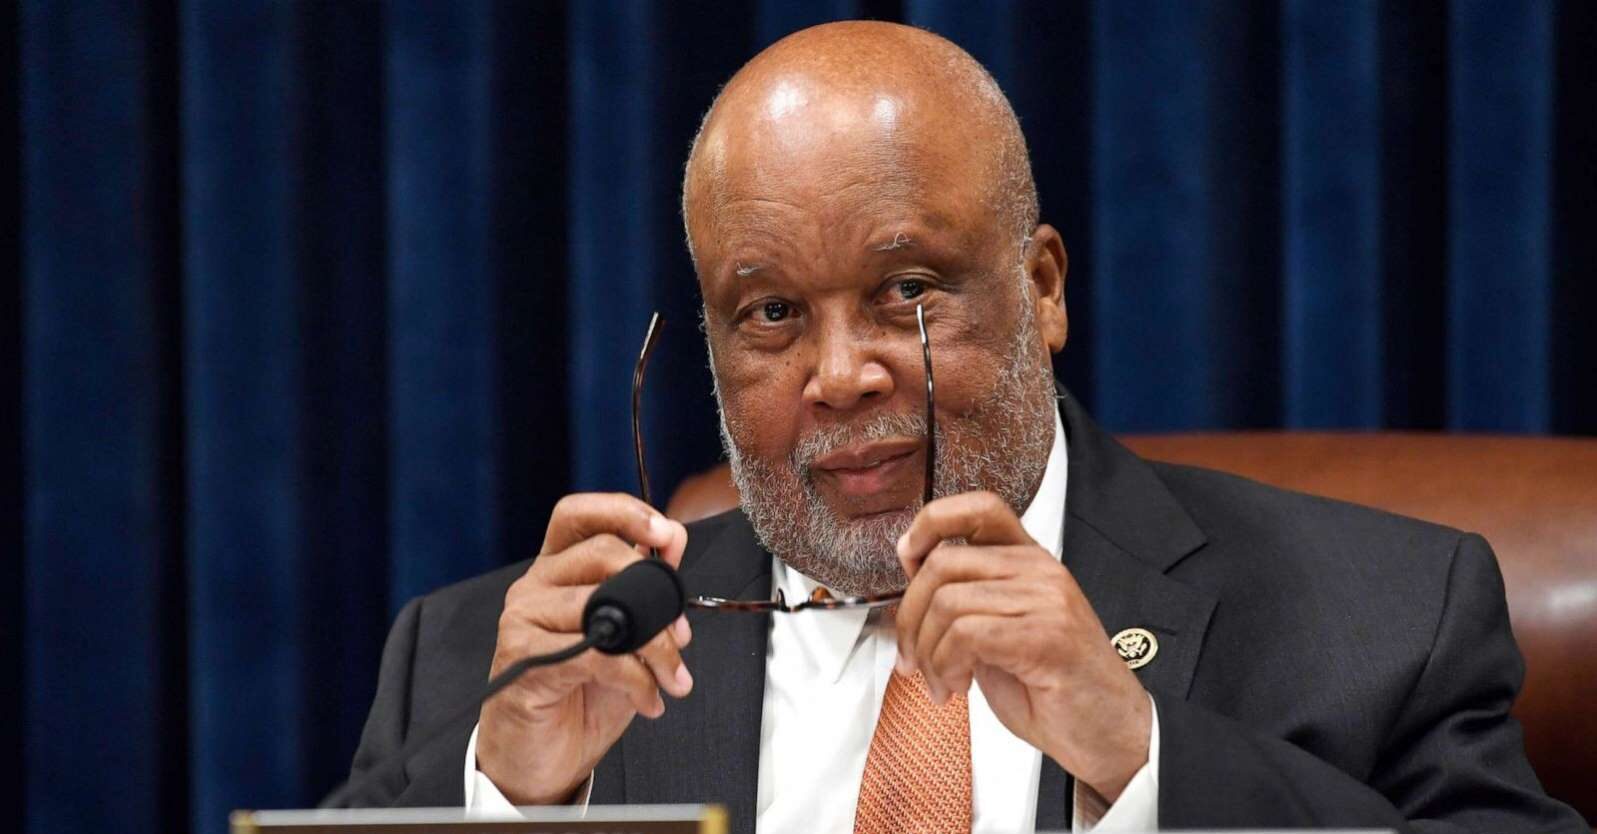 Bennie Thompson Confirms Jan. 6 Committee Will Release its Final Report Before the Midterms (mediaite.com)